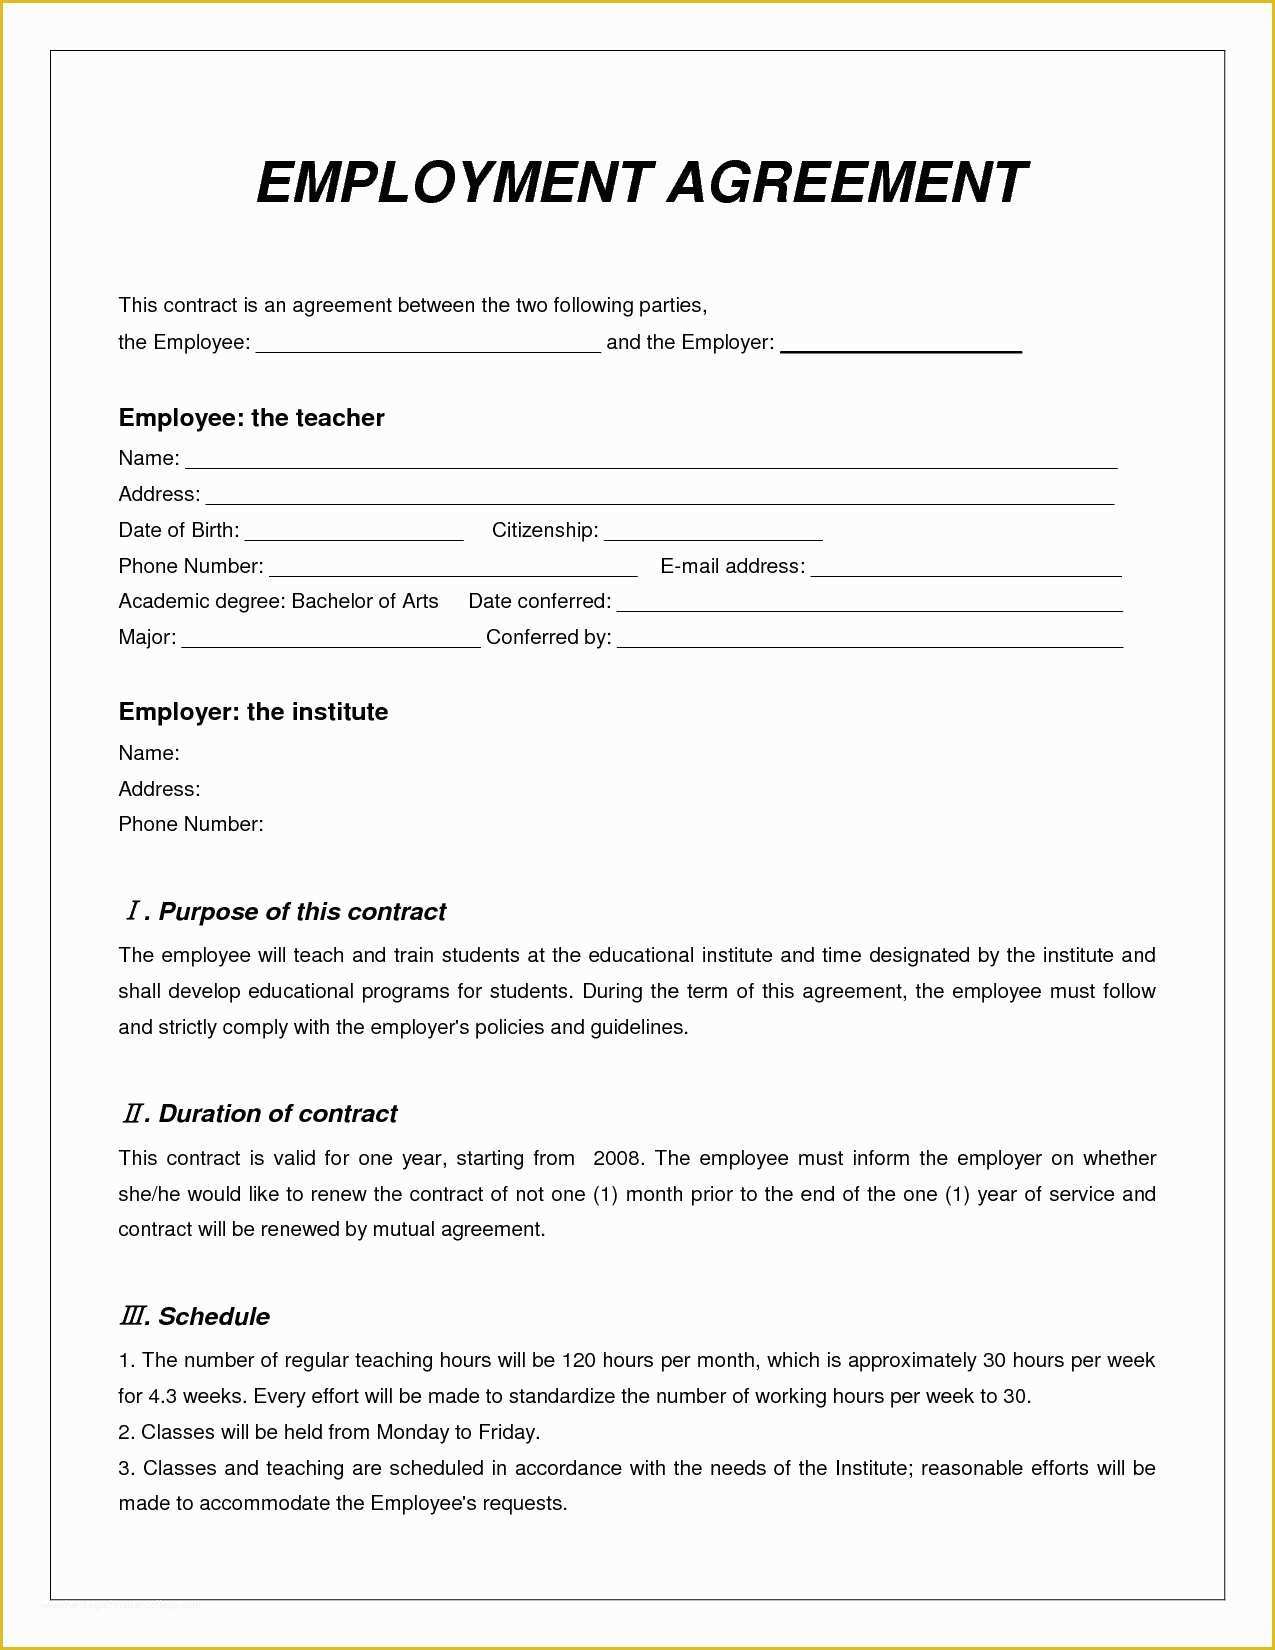 Work for Hire Contract Template Free Of Contract Employee Agreement Sample Templates Resume